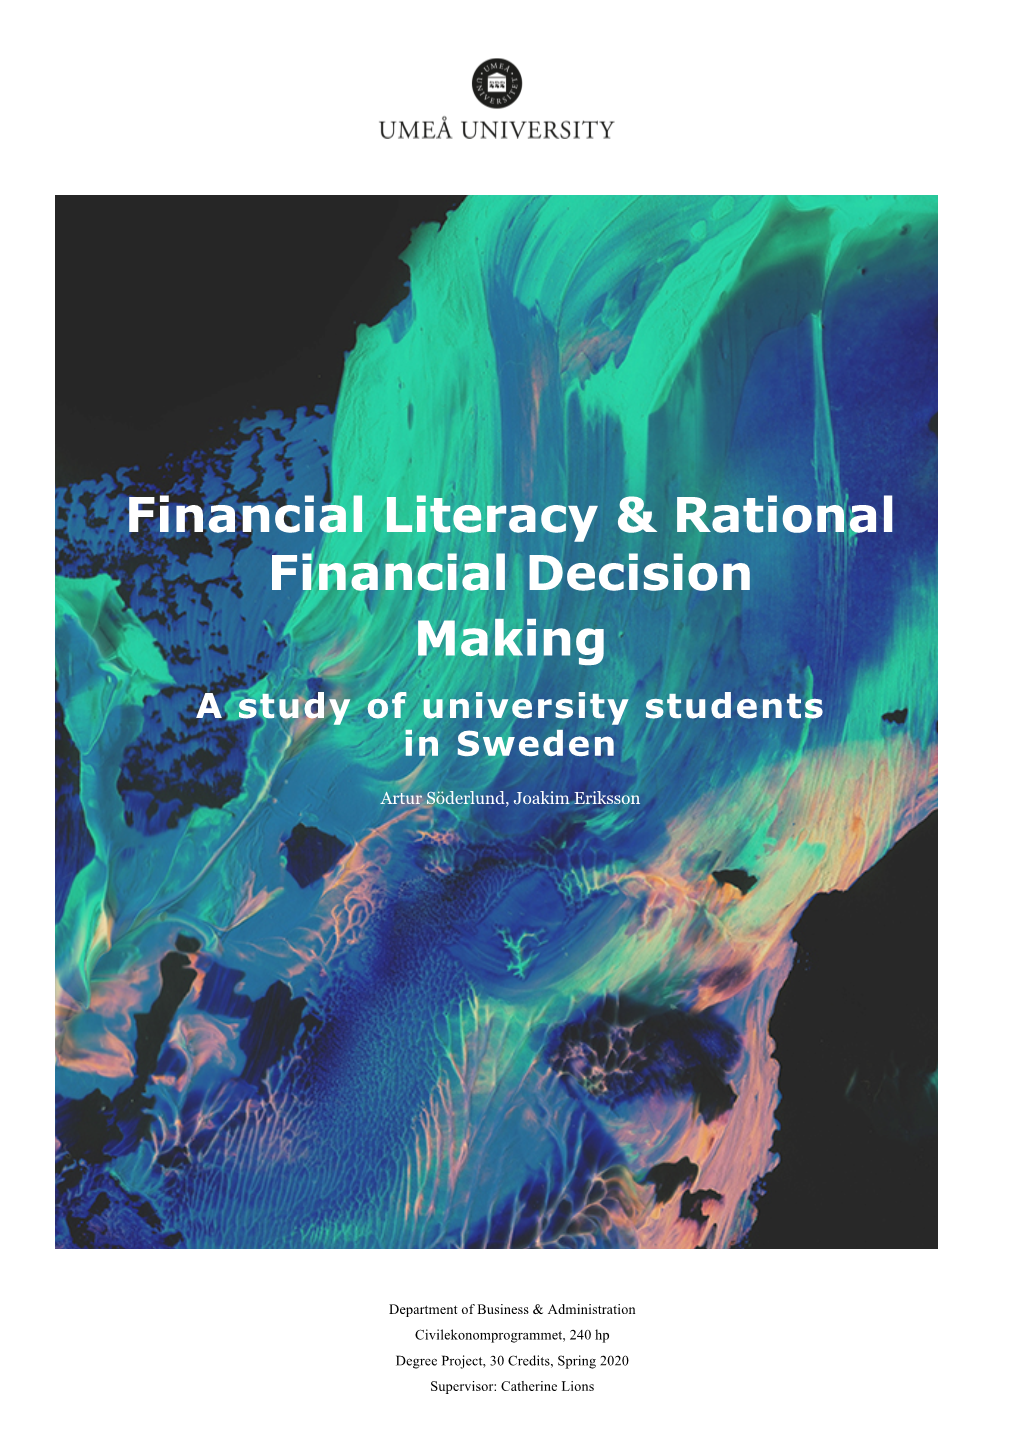 Financial Literacy & Rational Financial Decision Making